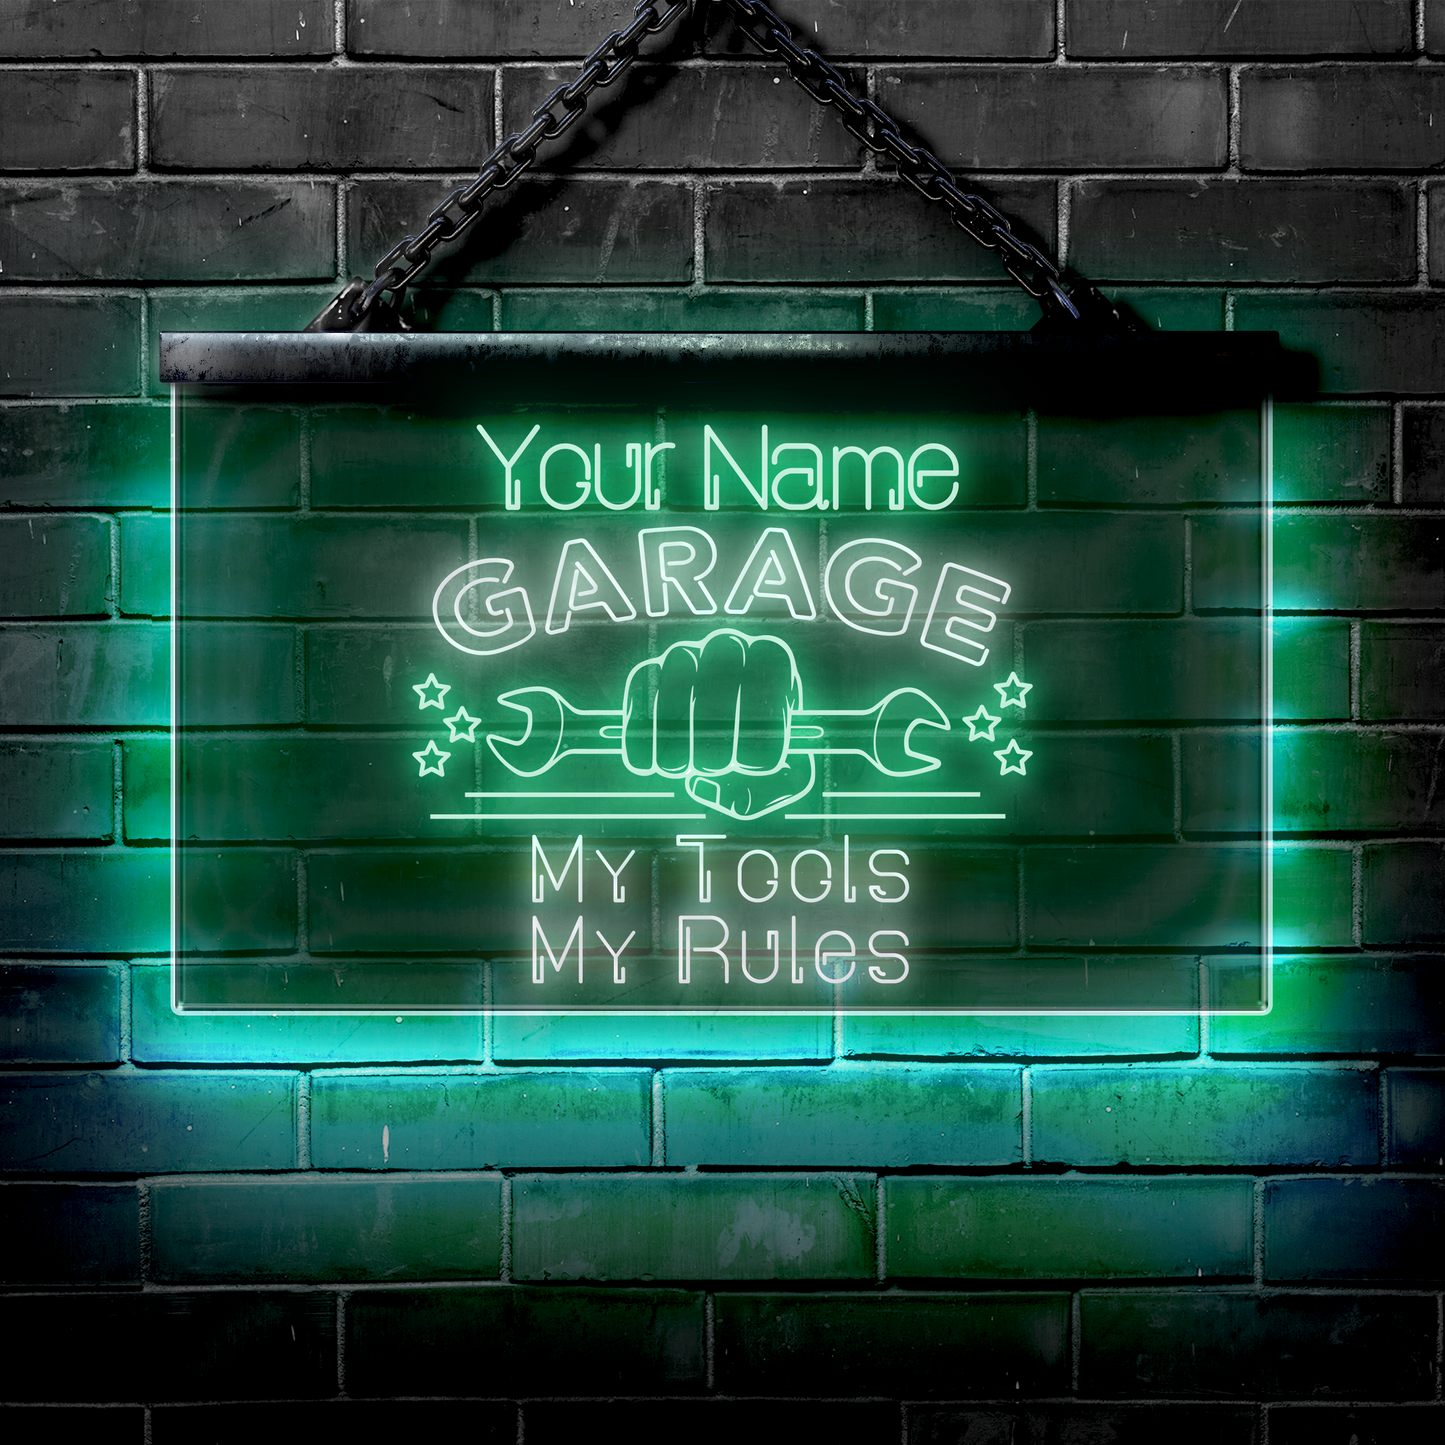 Personalized LED Garage Sign: My Tools My Rules